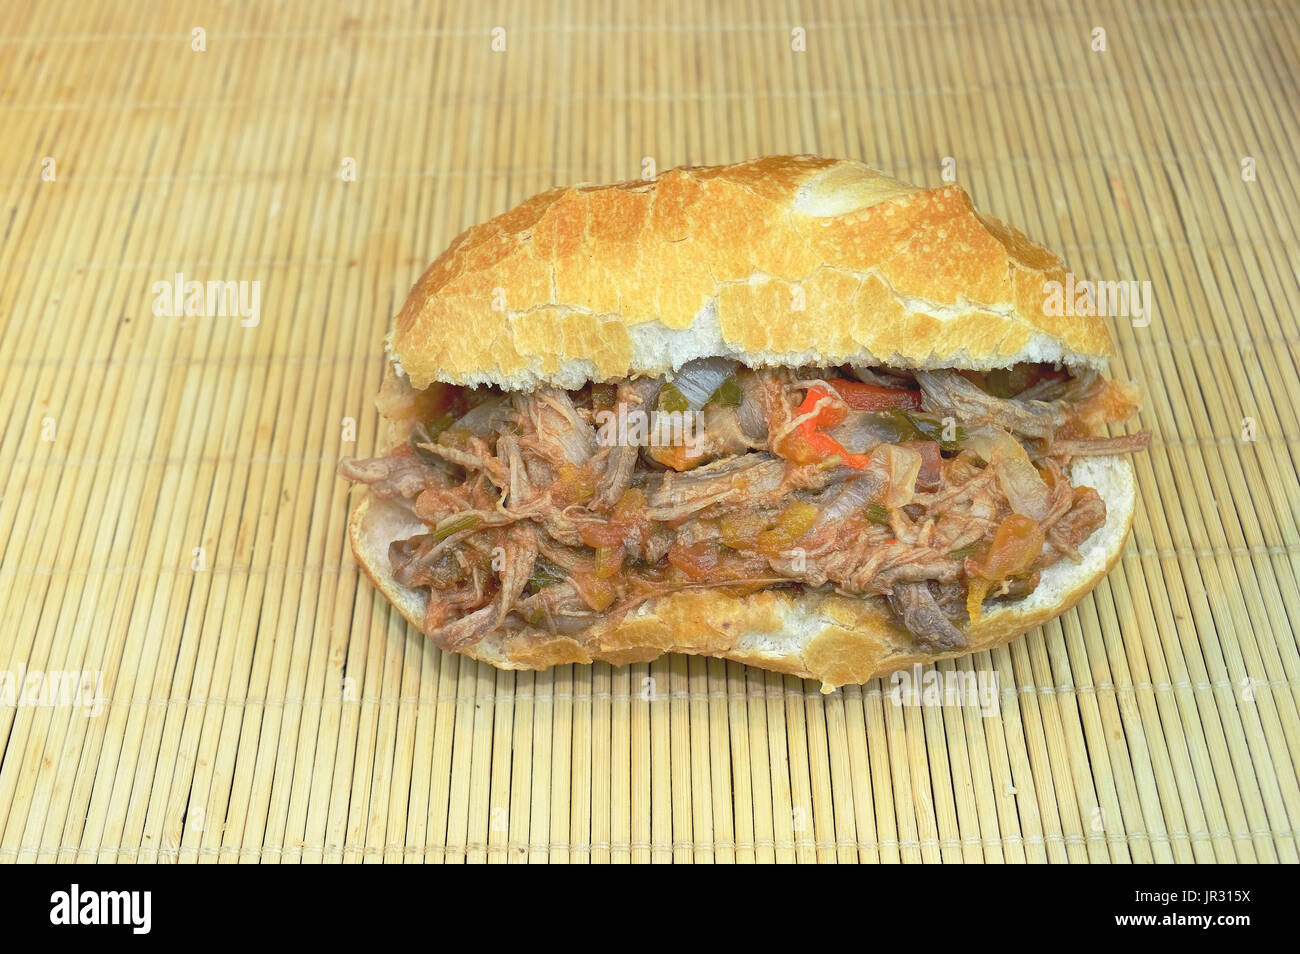 Top view of meat sandwich over a wood surface Stock Photo